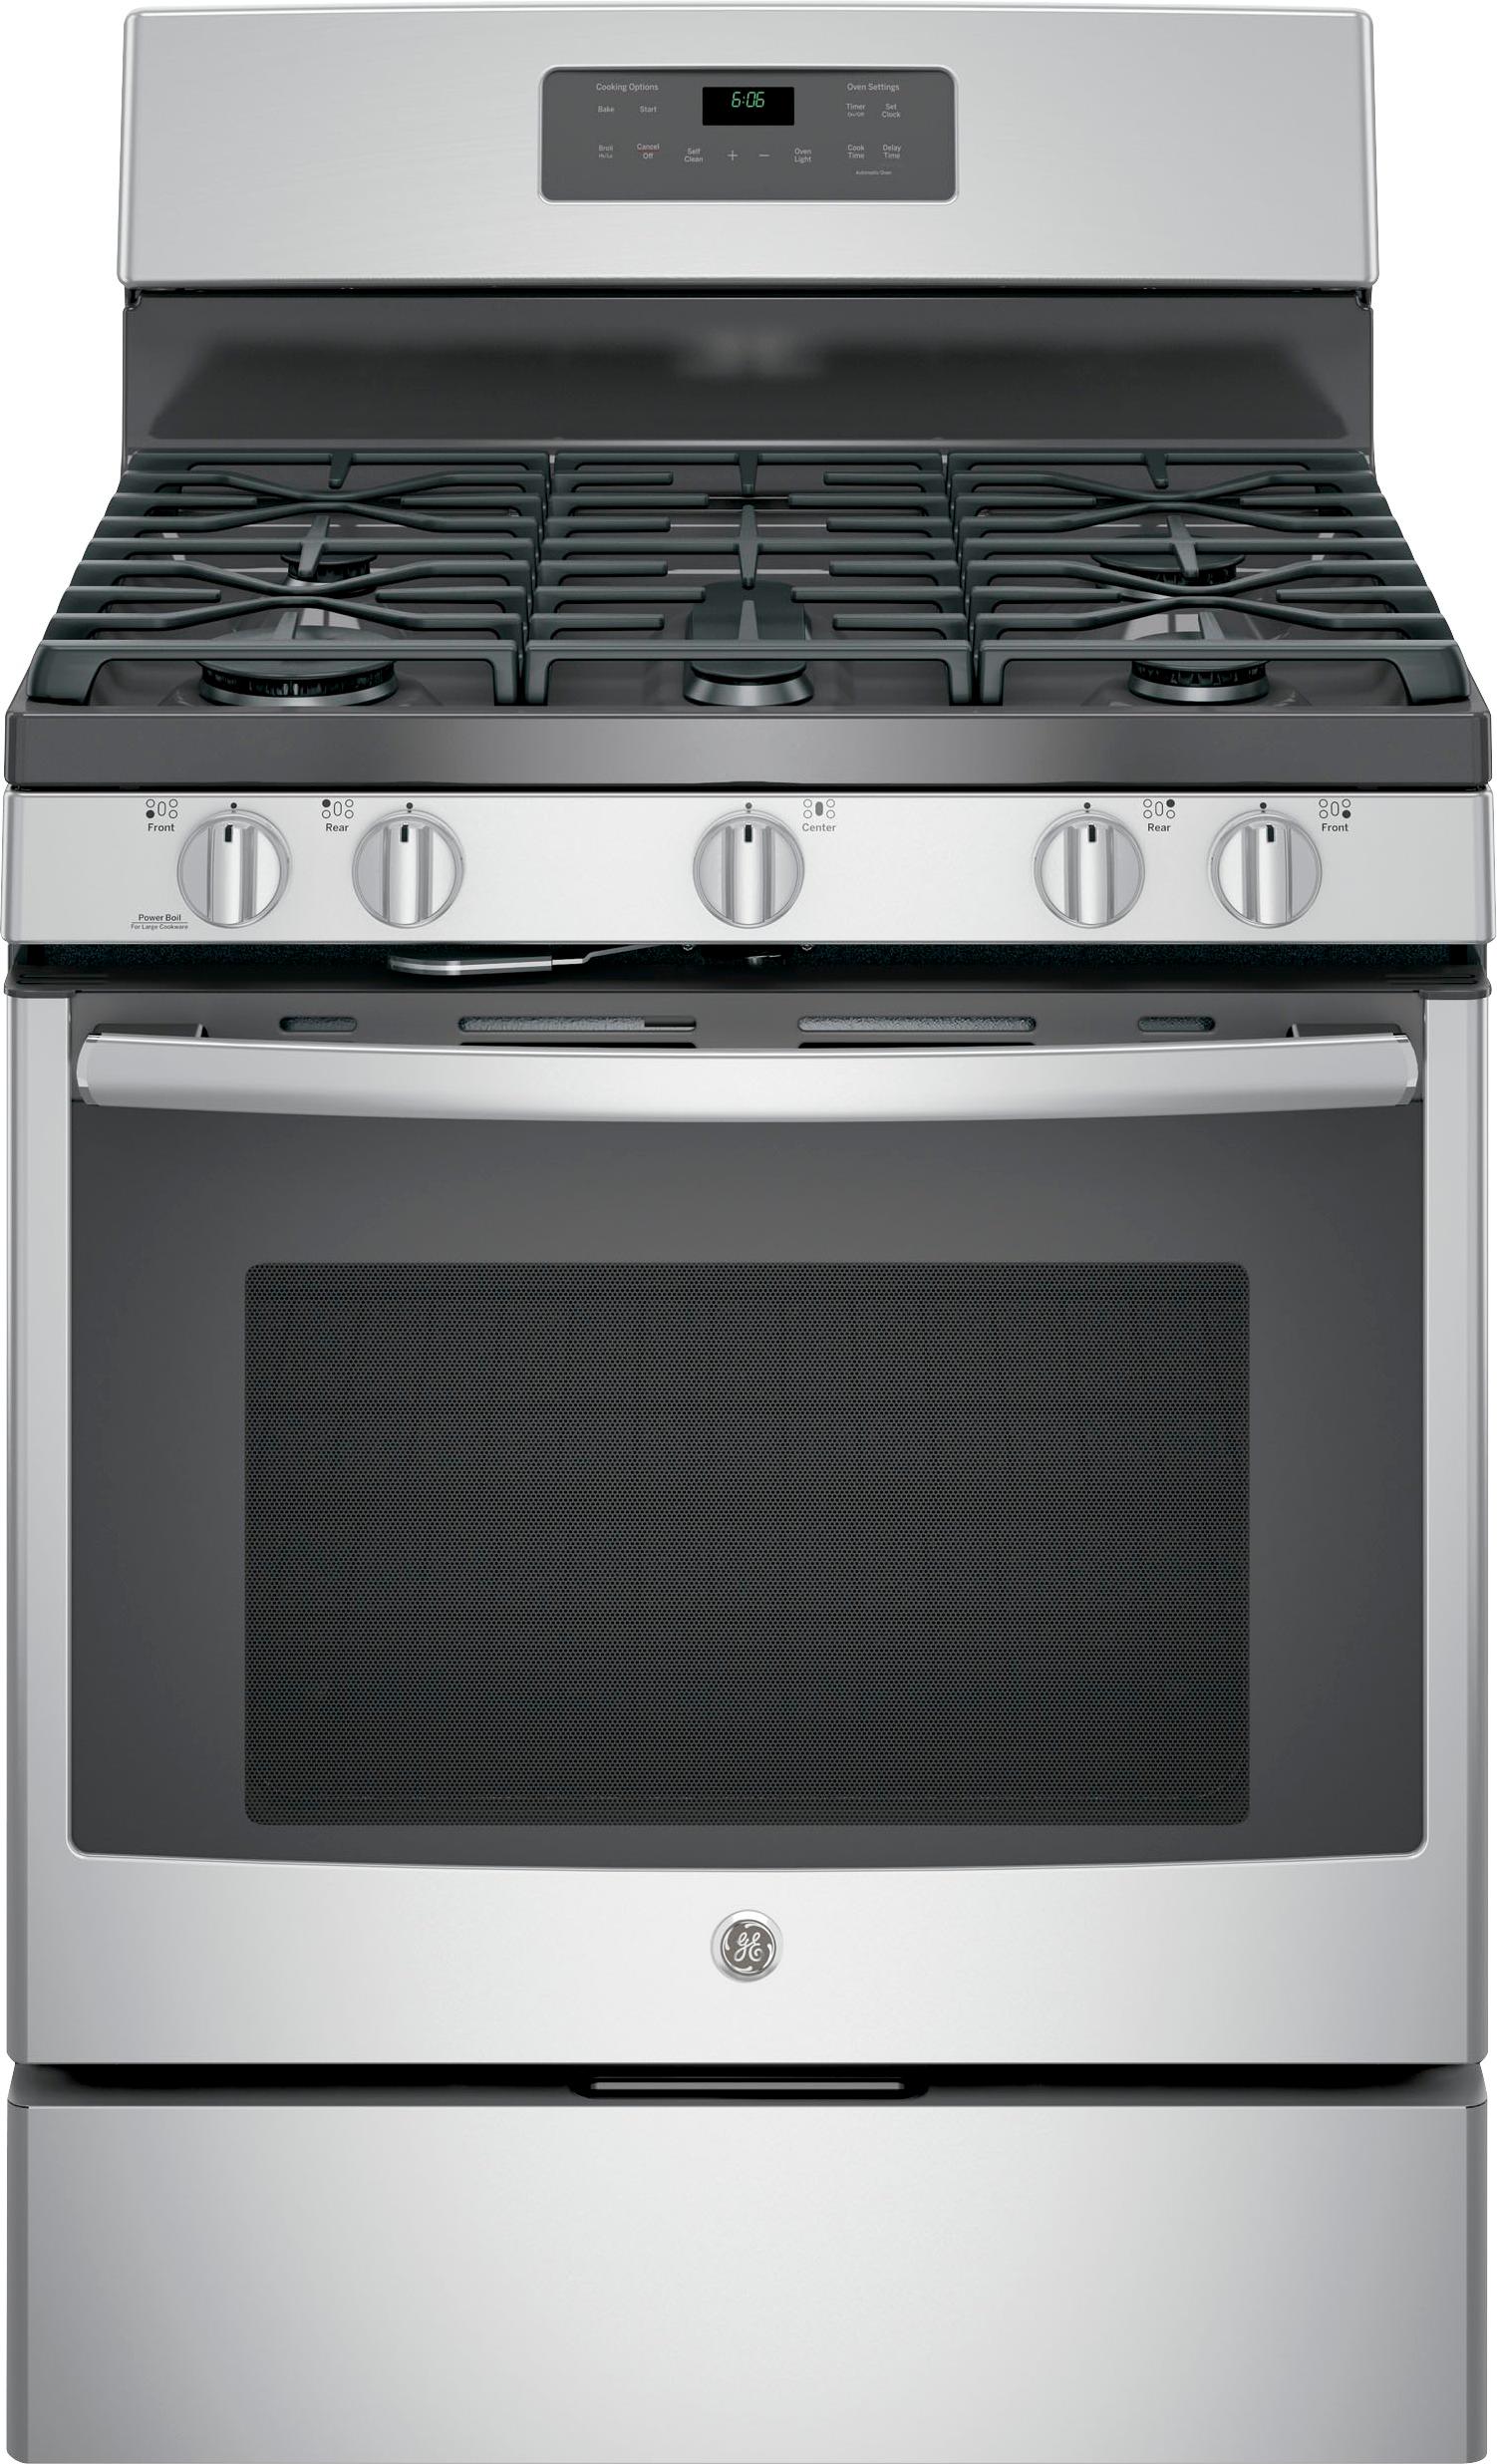 GE - 5.0 Cu. Ft. Self-Cleaning Freestanding Gas Range - Stainless steel Ge Stainless Steel Stove Gas